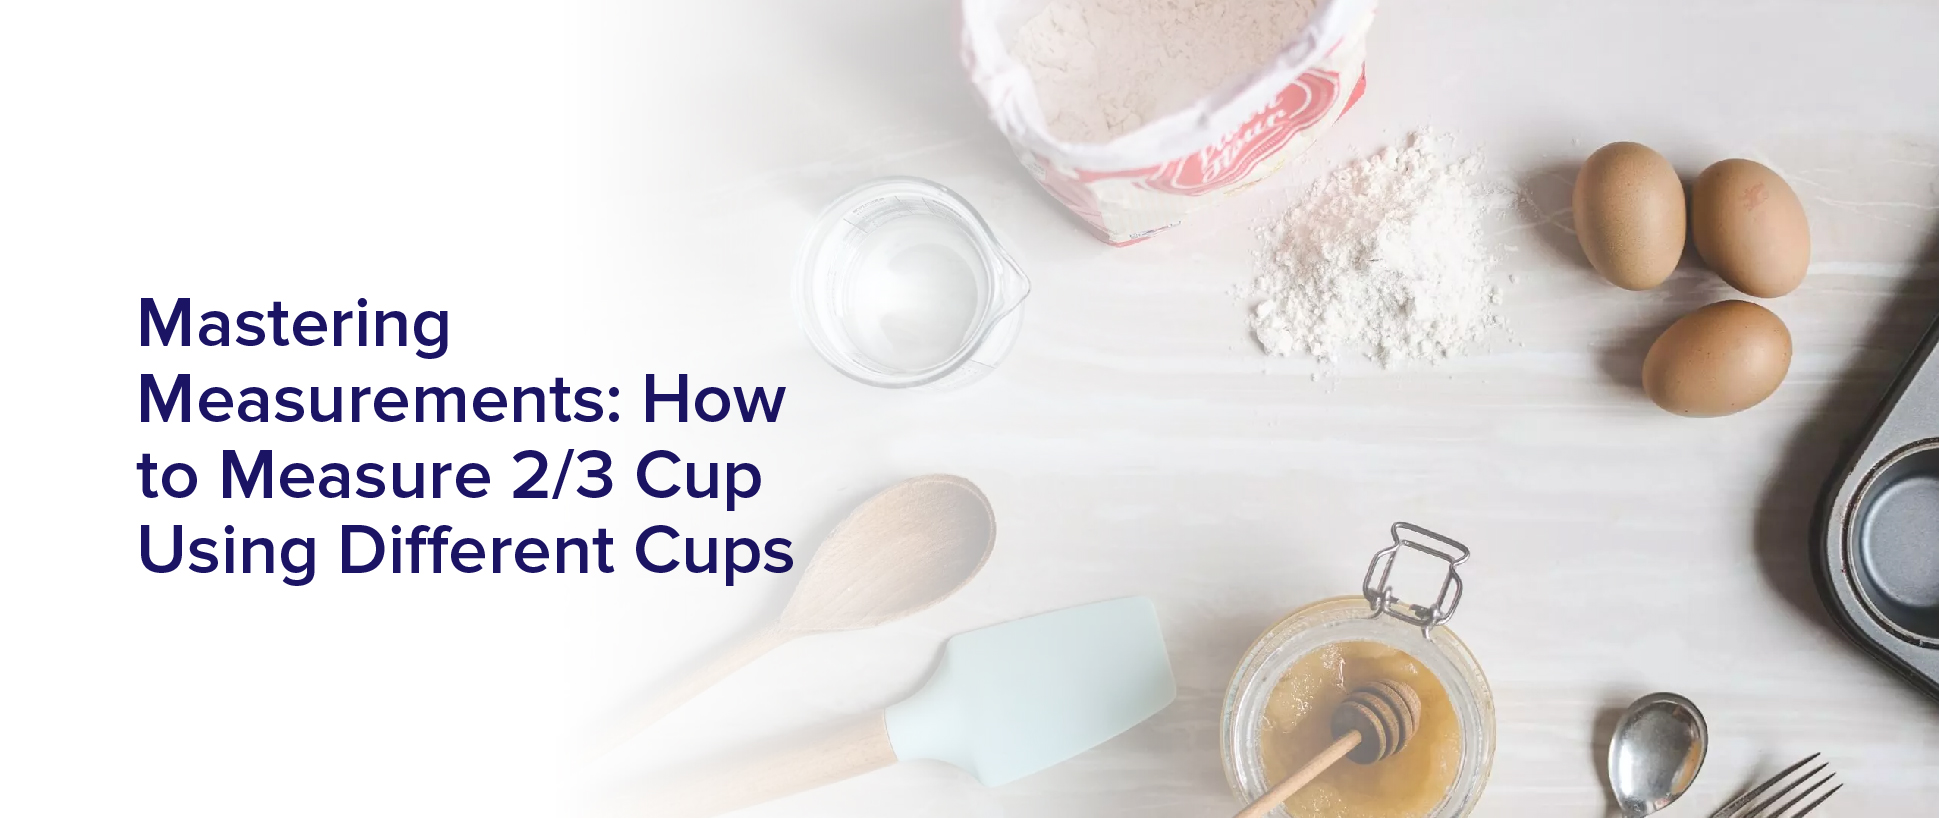 Mastering Measurements: How To Measure 2/3 Cup Using Different Cups"